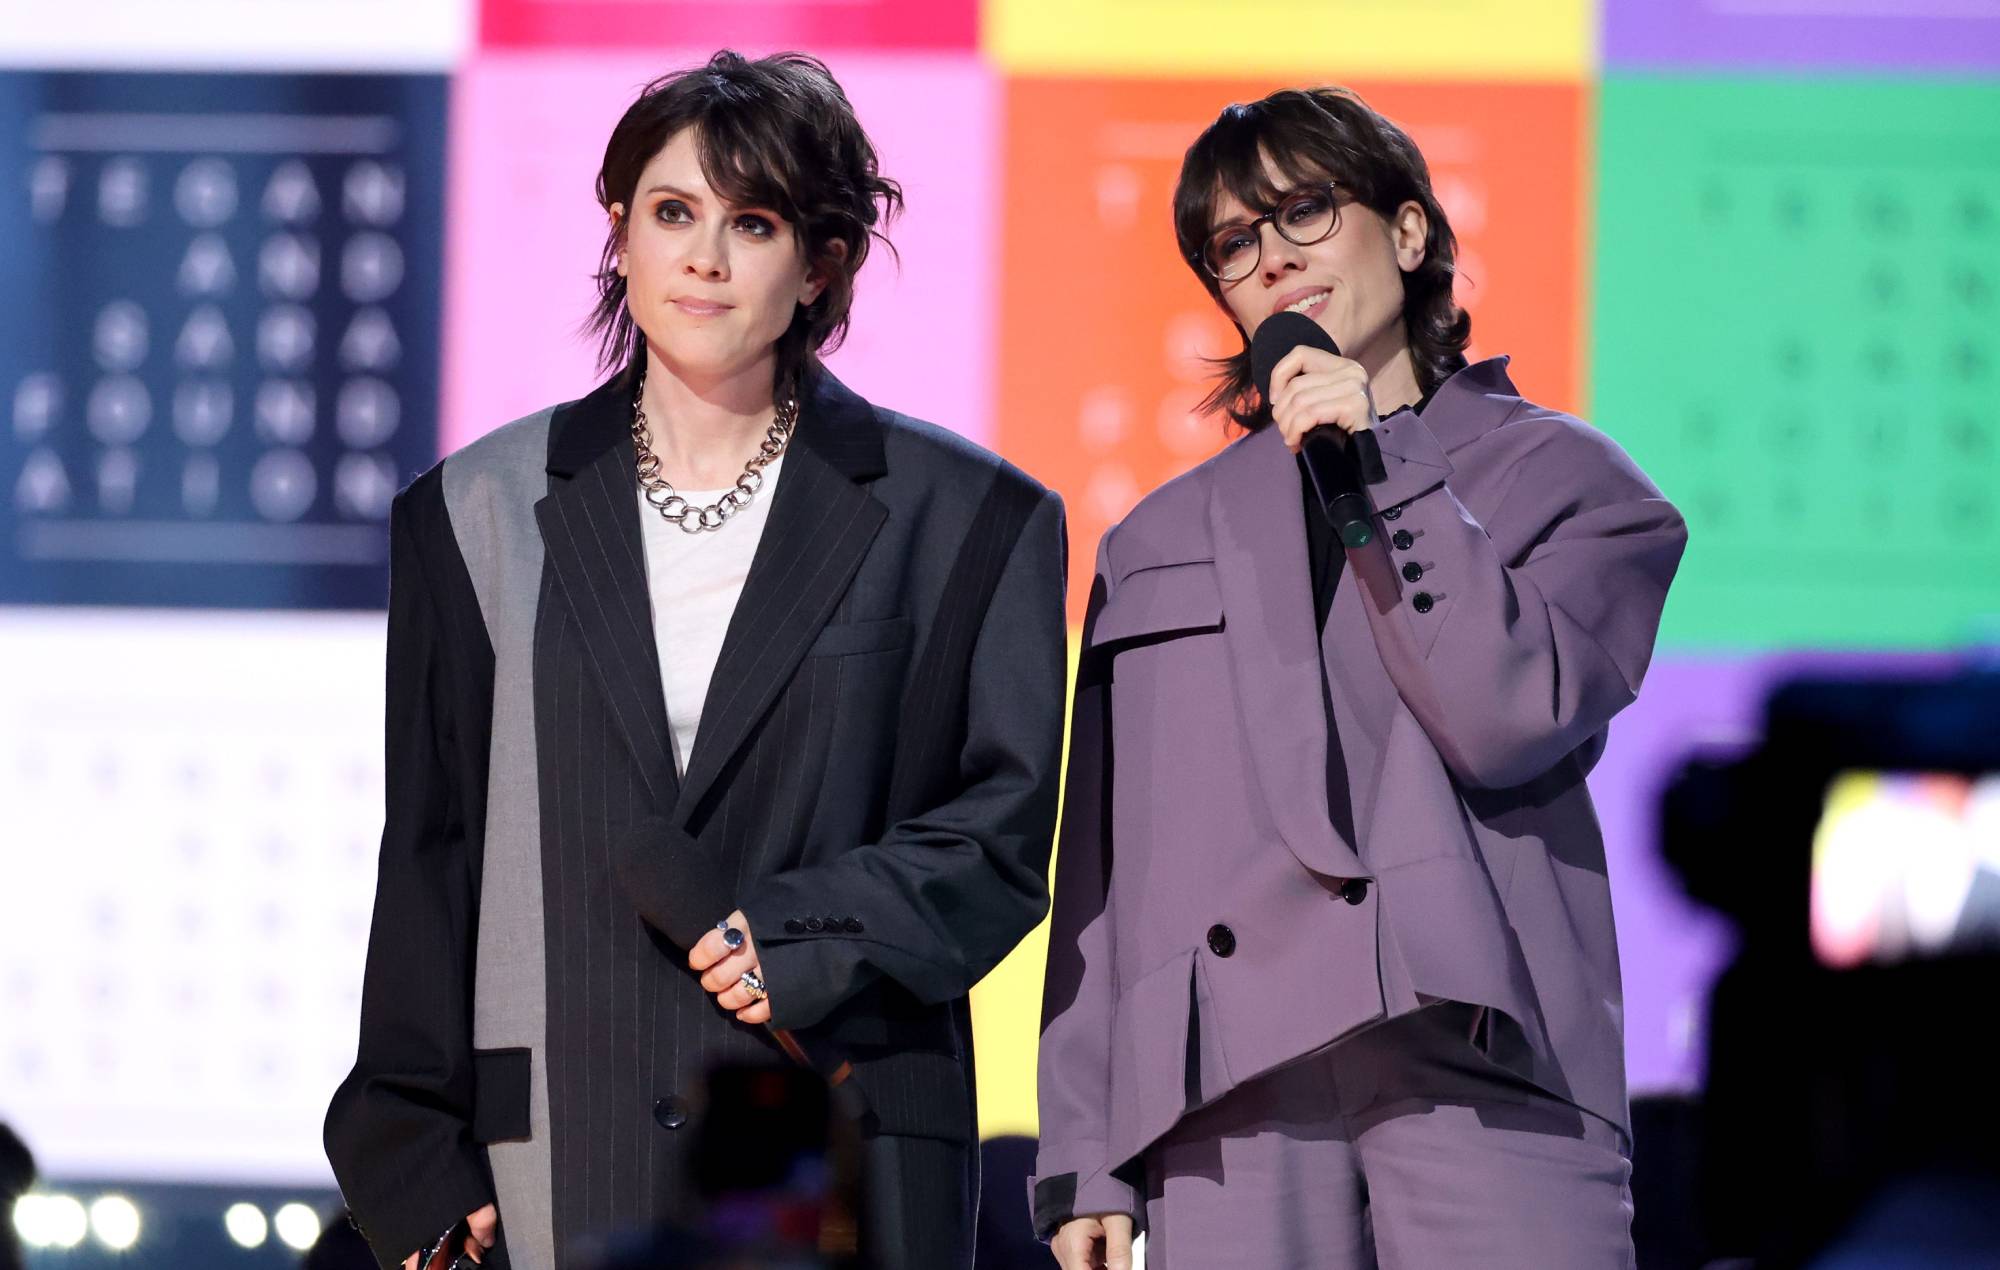 Tegan and Sara: catfishing scheme that targeted fans turned into documentary